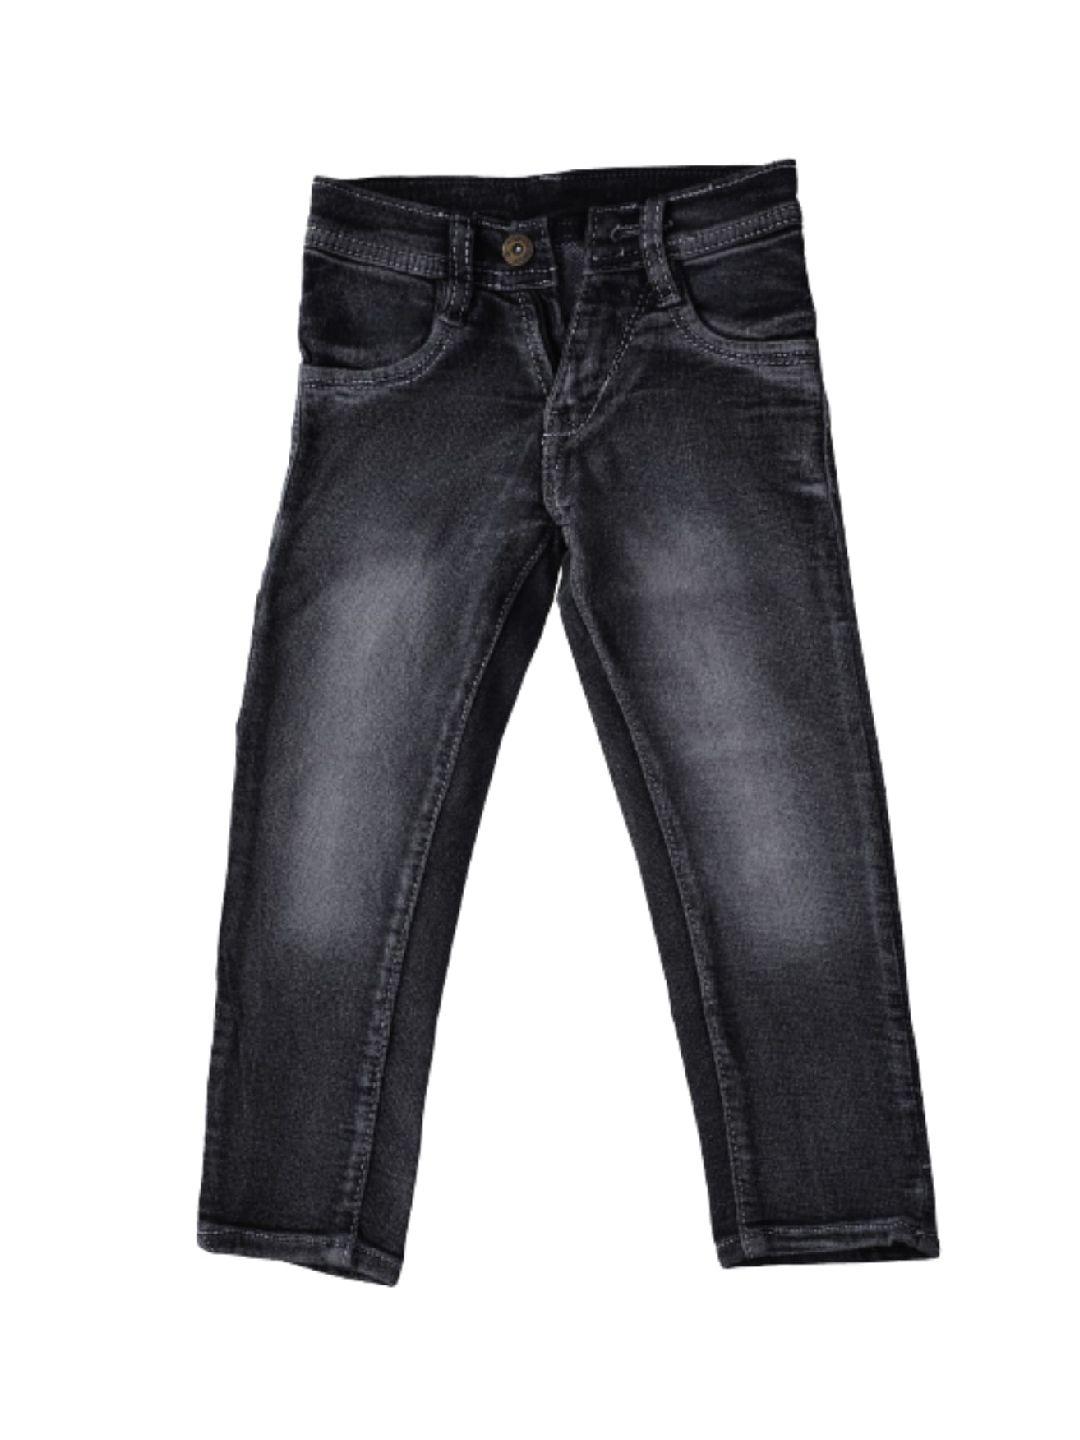 pro-ethic style developer boys black jean low distress heavy fade stretchable jeans